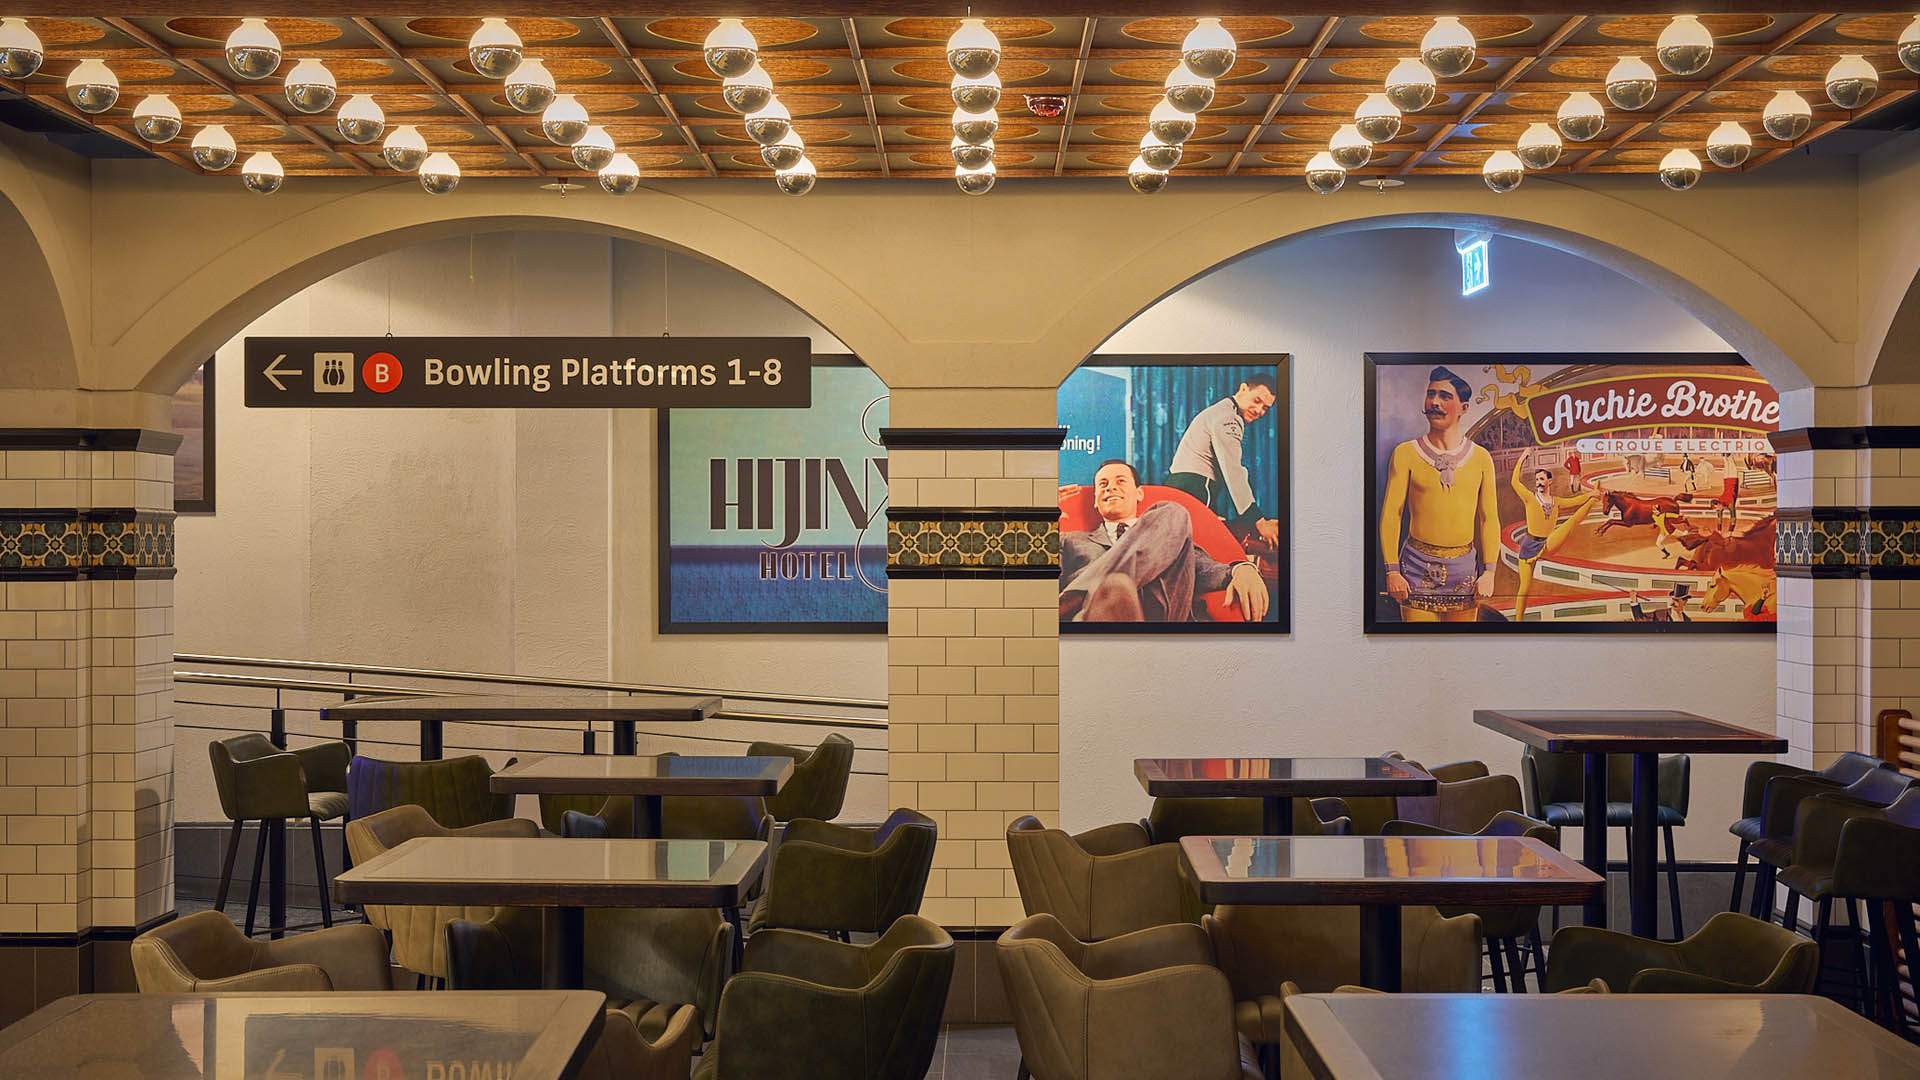 Now Open: Hijinx Hotel Is Melbourne's New OTT (and Nostalgia-Fuelled) Challenge Room Bar